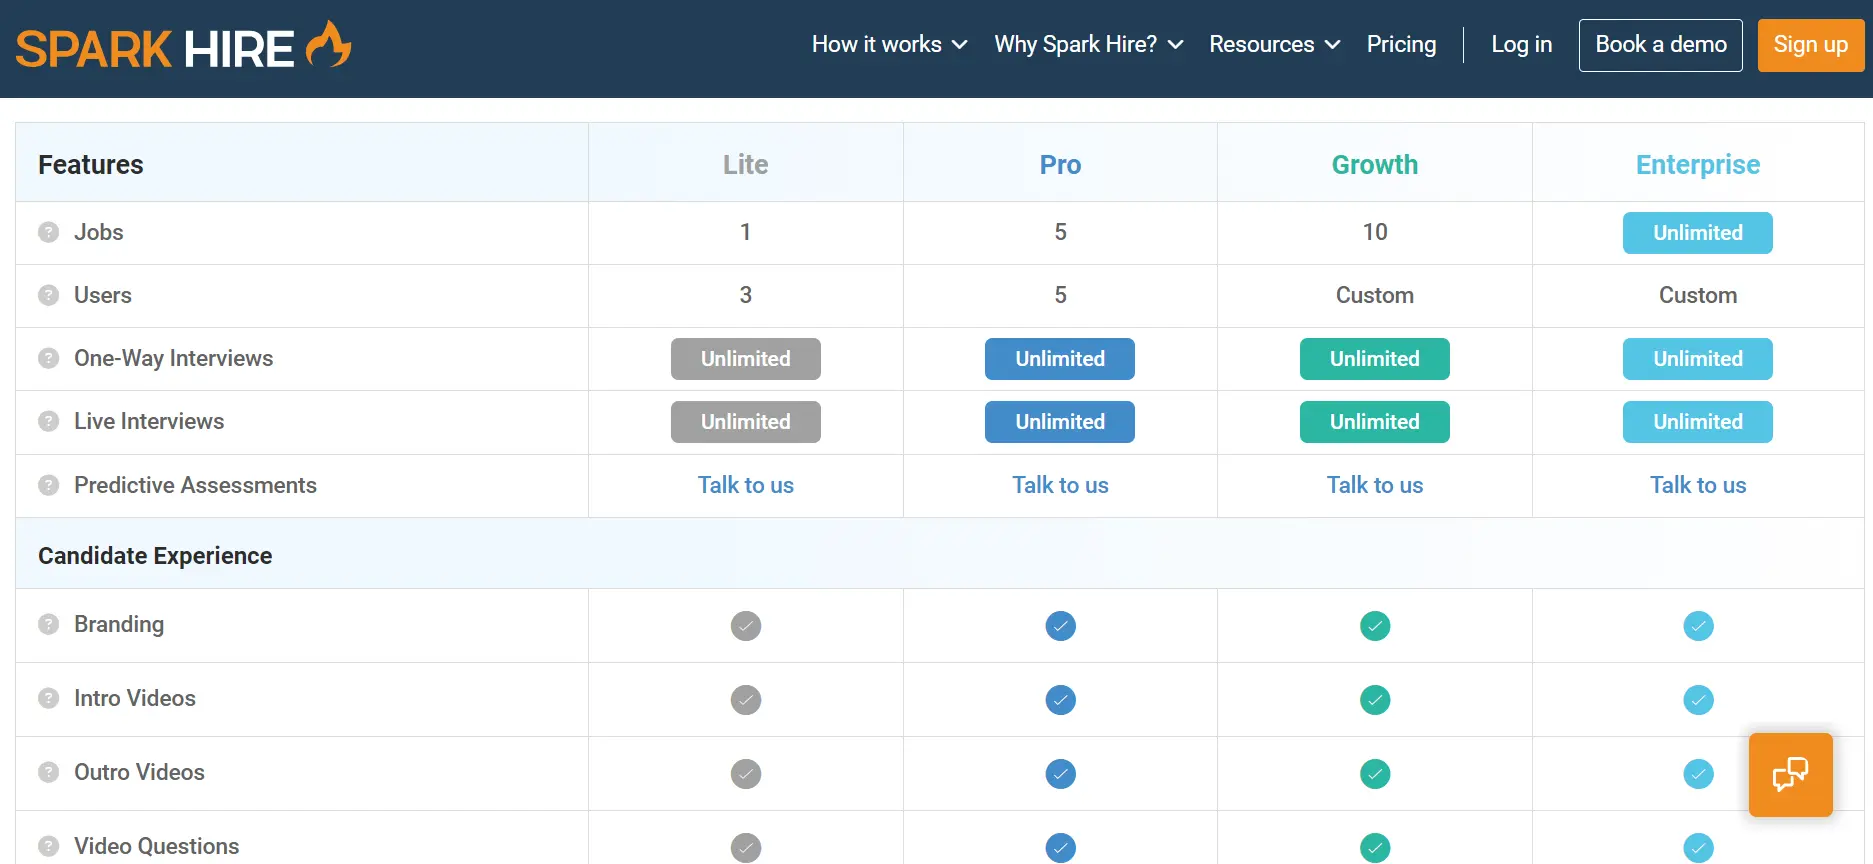 A screenshot of Spark Hire’s pricing plans and their features.